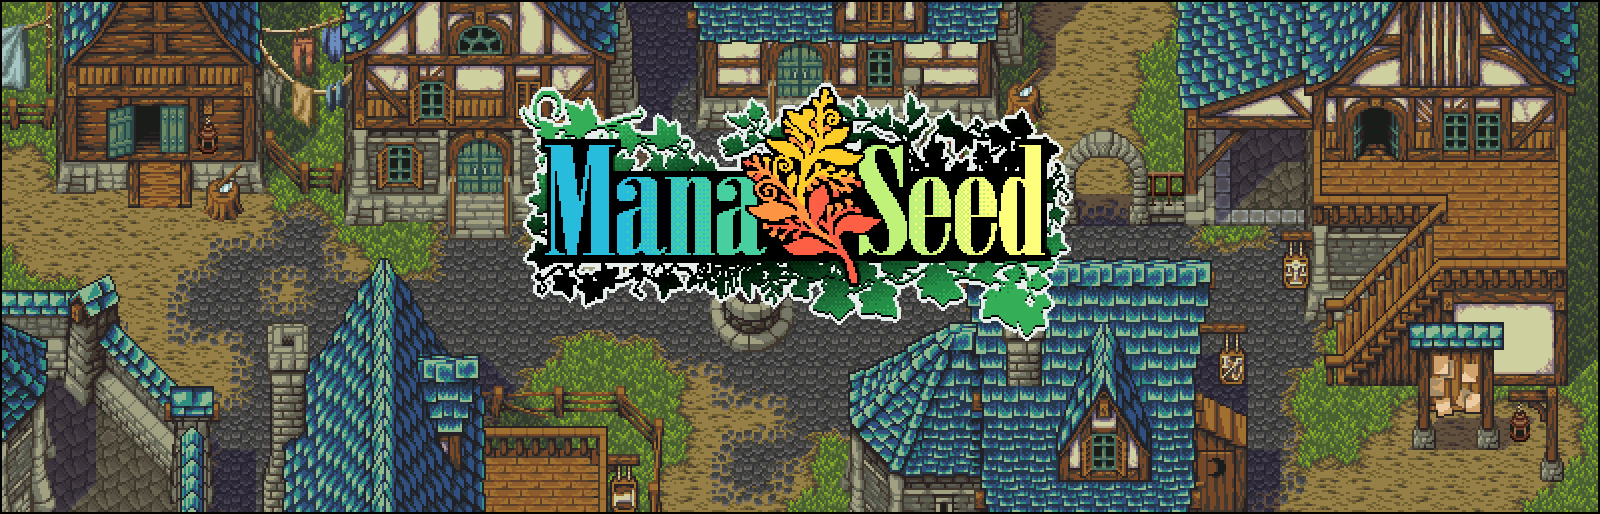 Free Pixel Art Character - The Mana Seed "Farmer Sprite System"